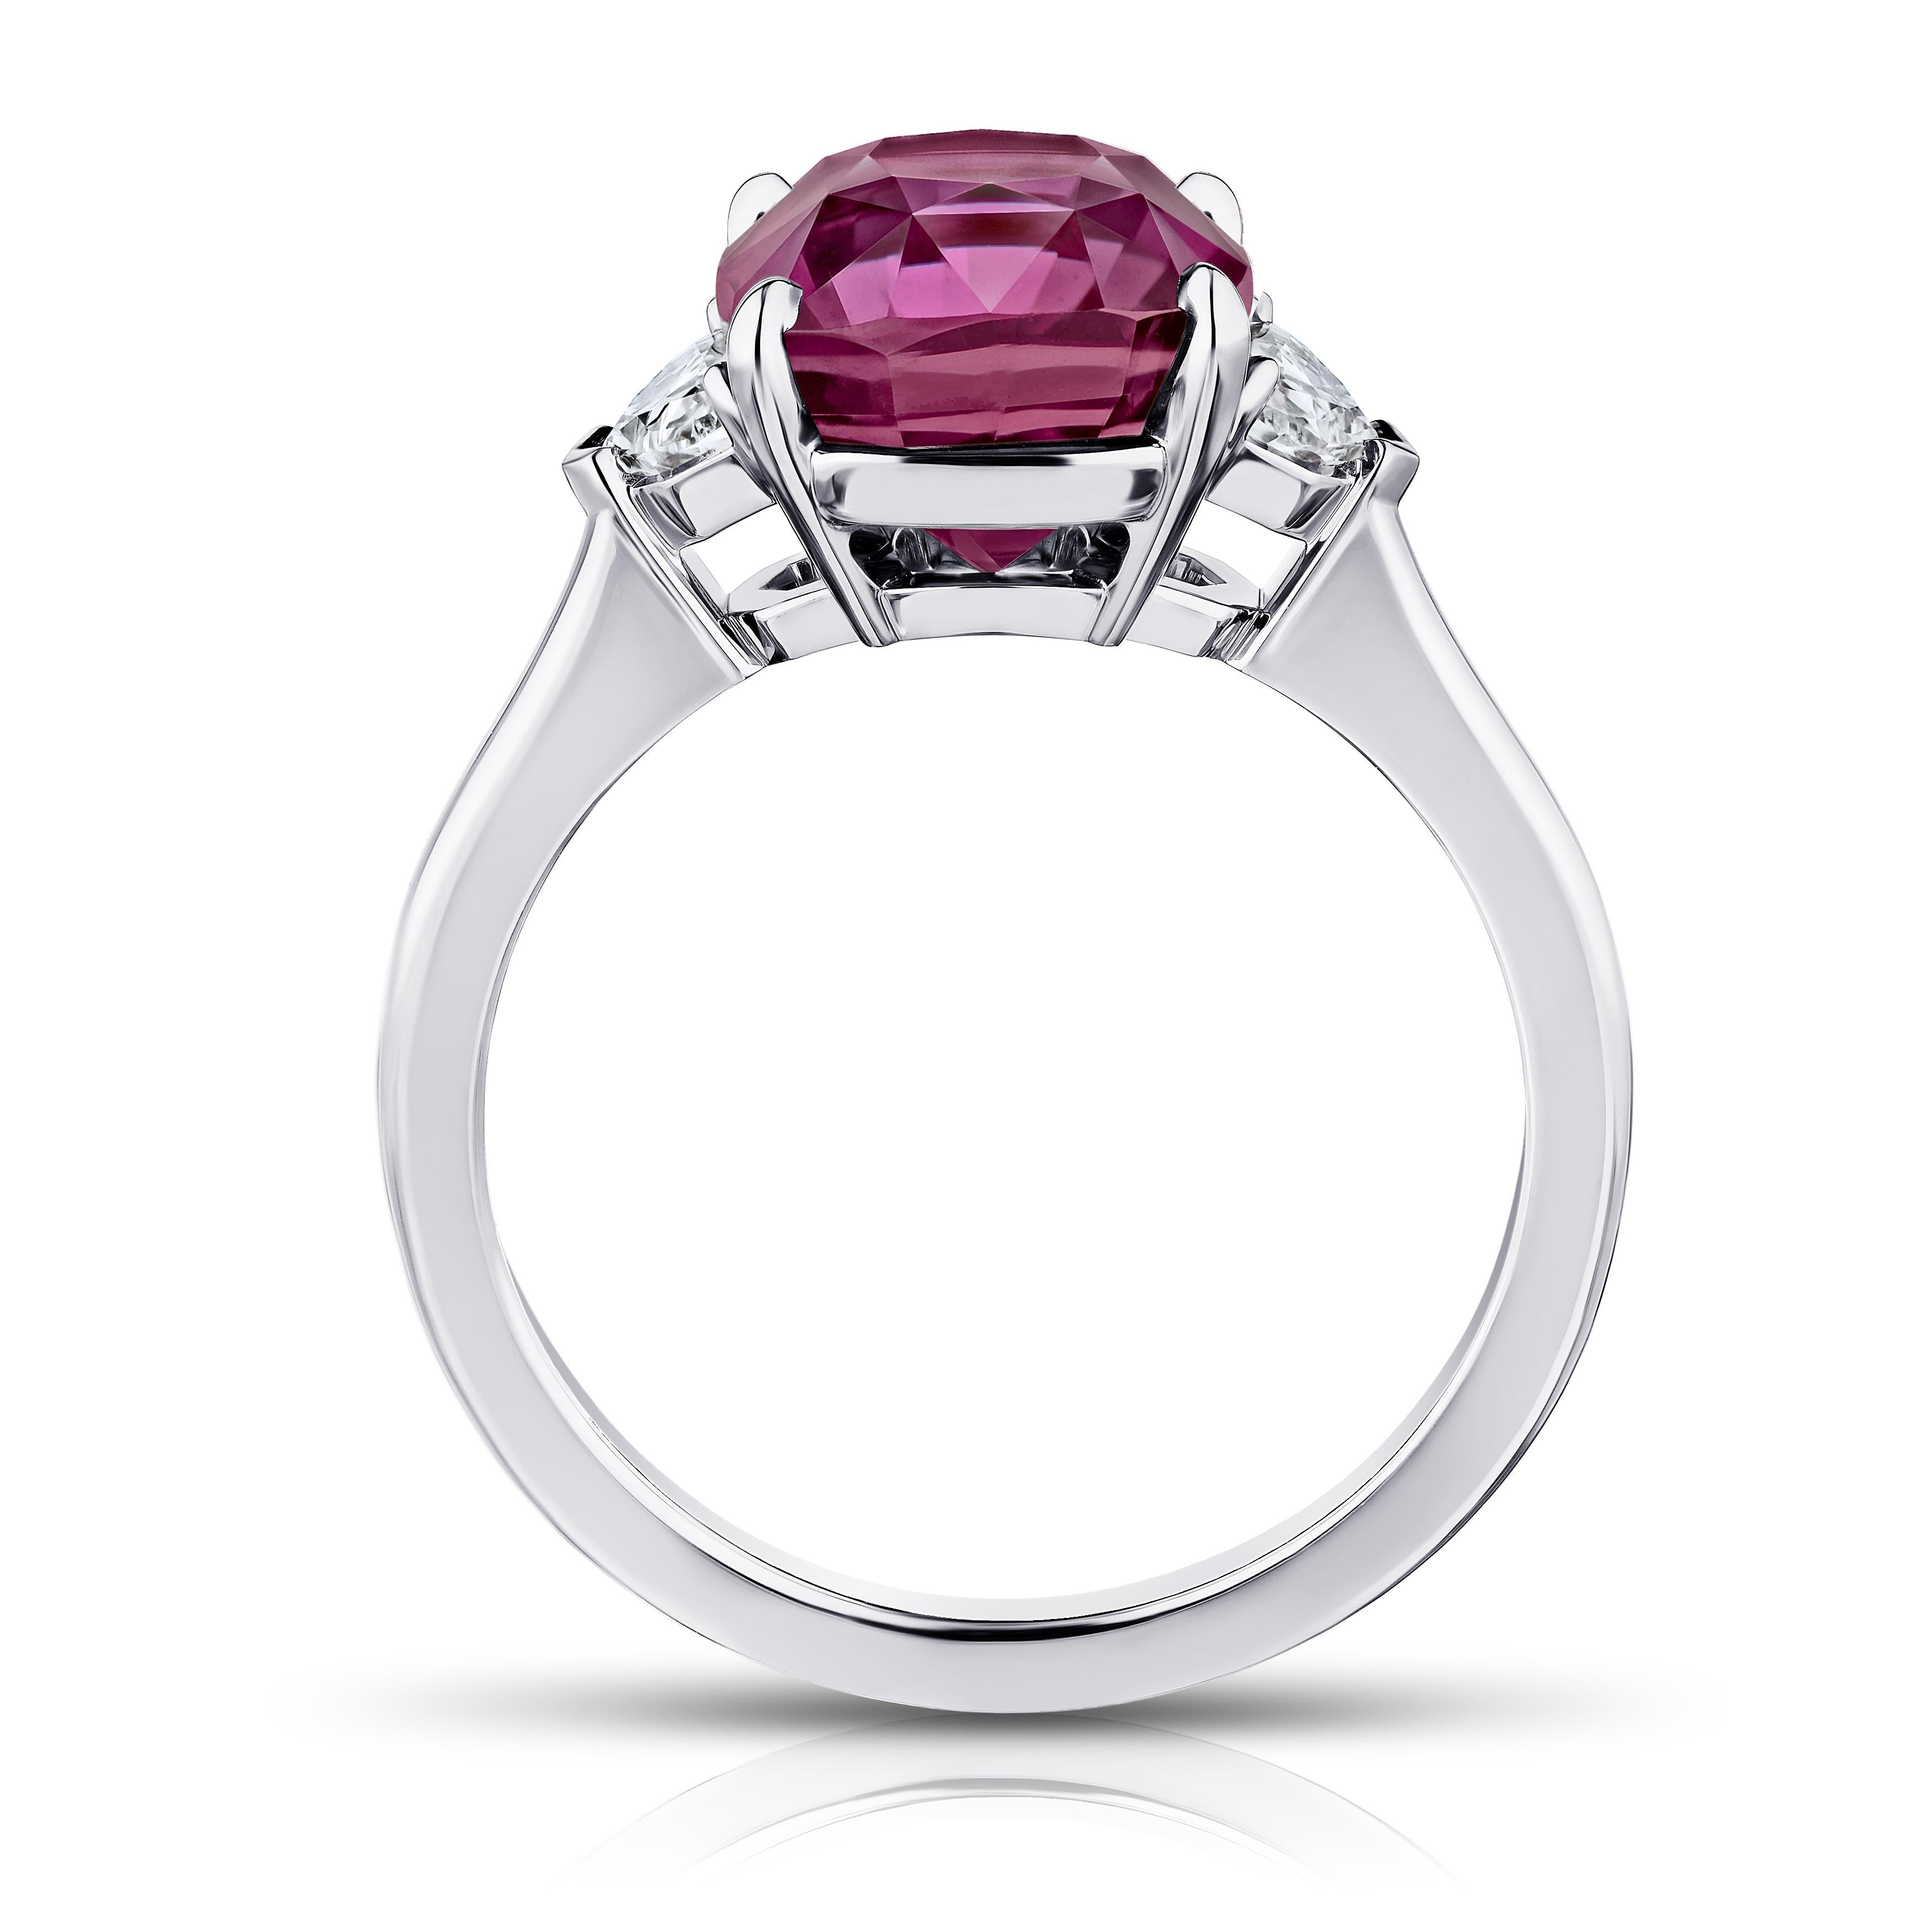 Contemporary 5.88 Carat Cushion Pinkish Red Sapphire and Diamond Ring For Sale